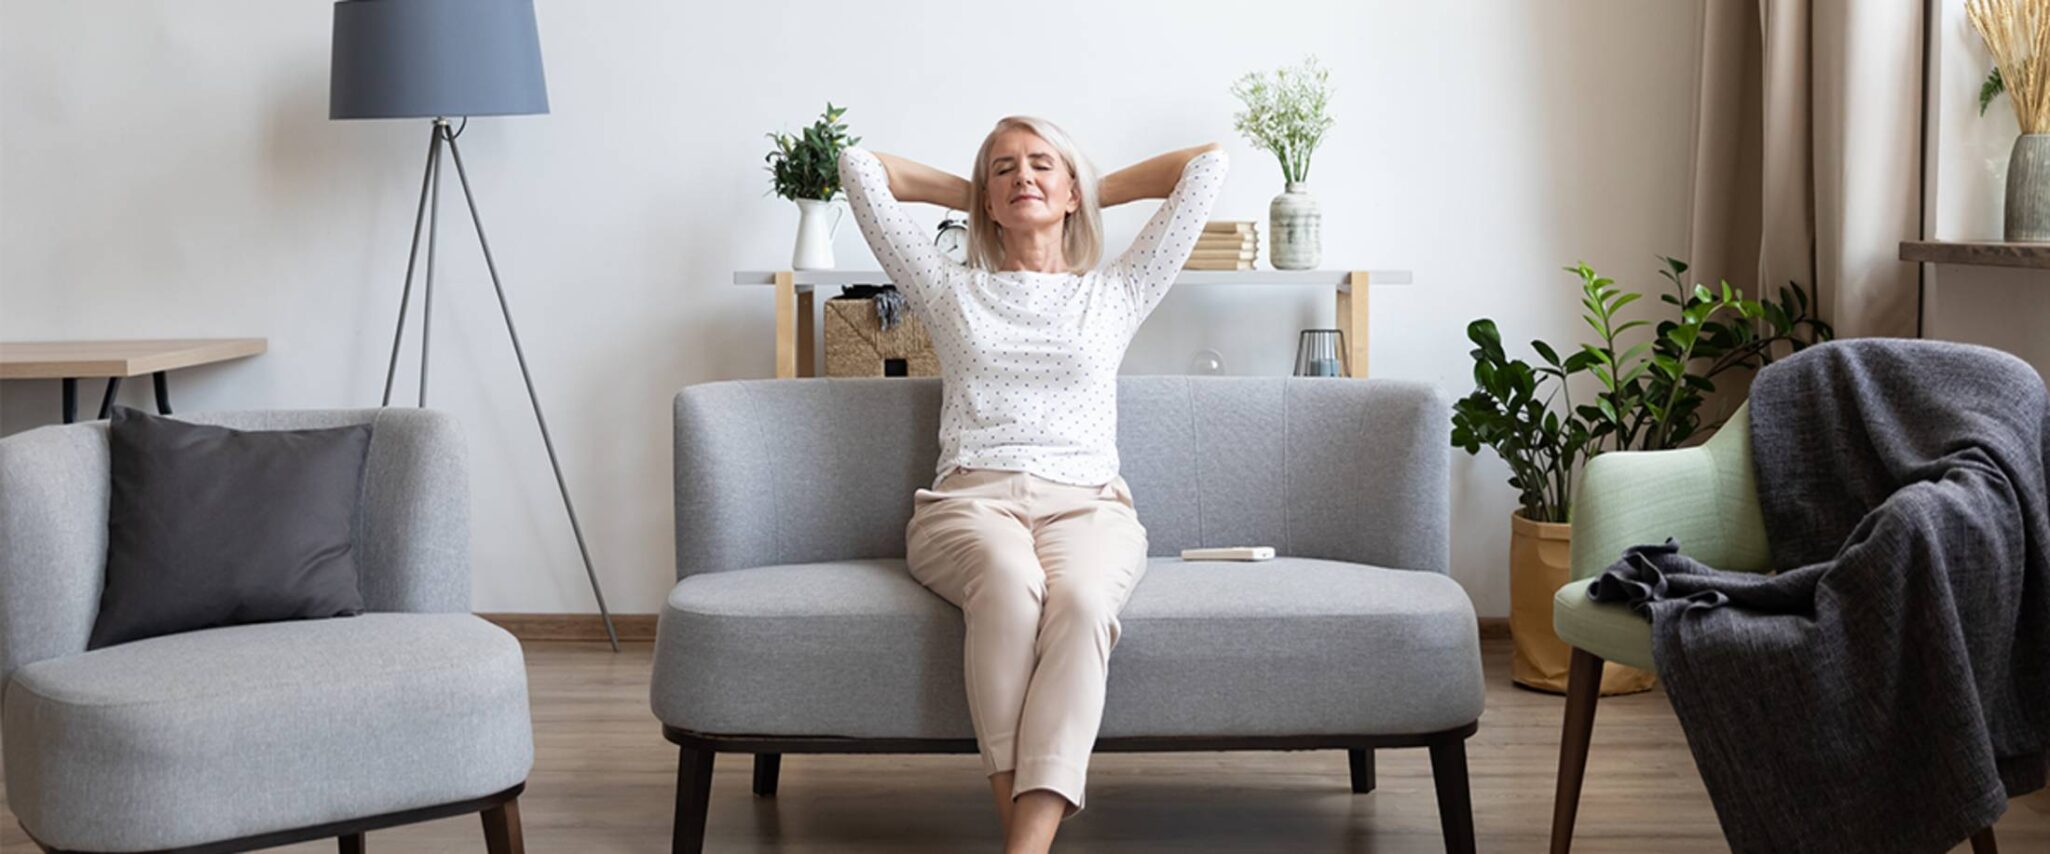 A senior woman puts her hands behind her head as she stretches and relaxes on her couch